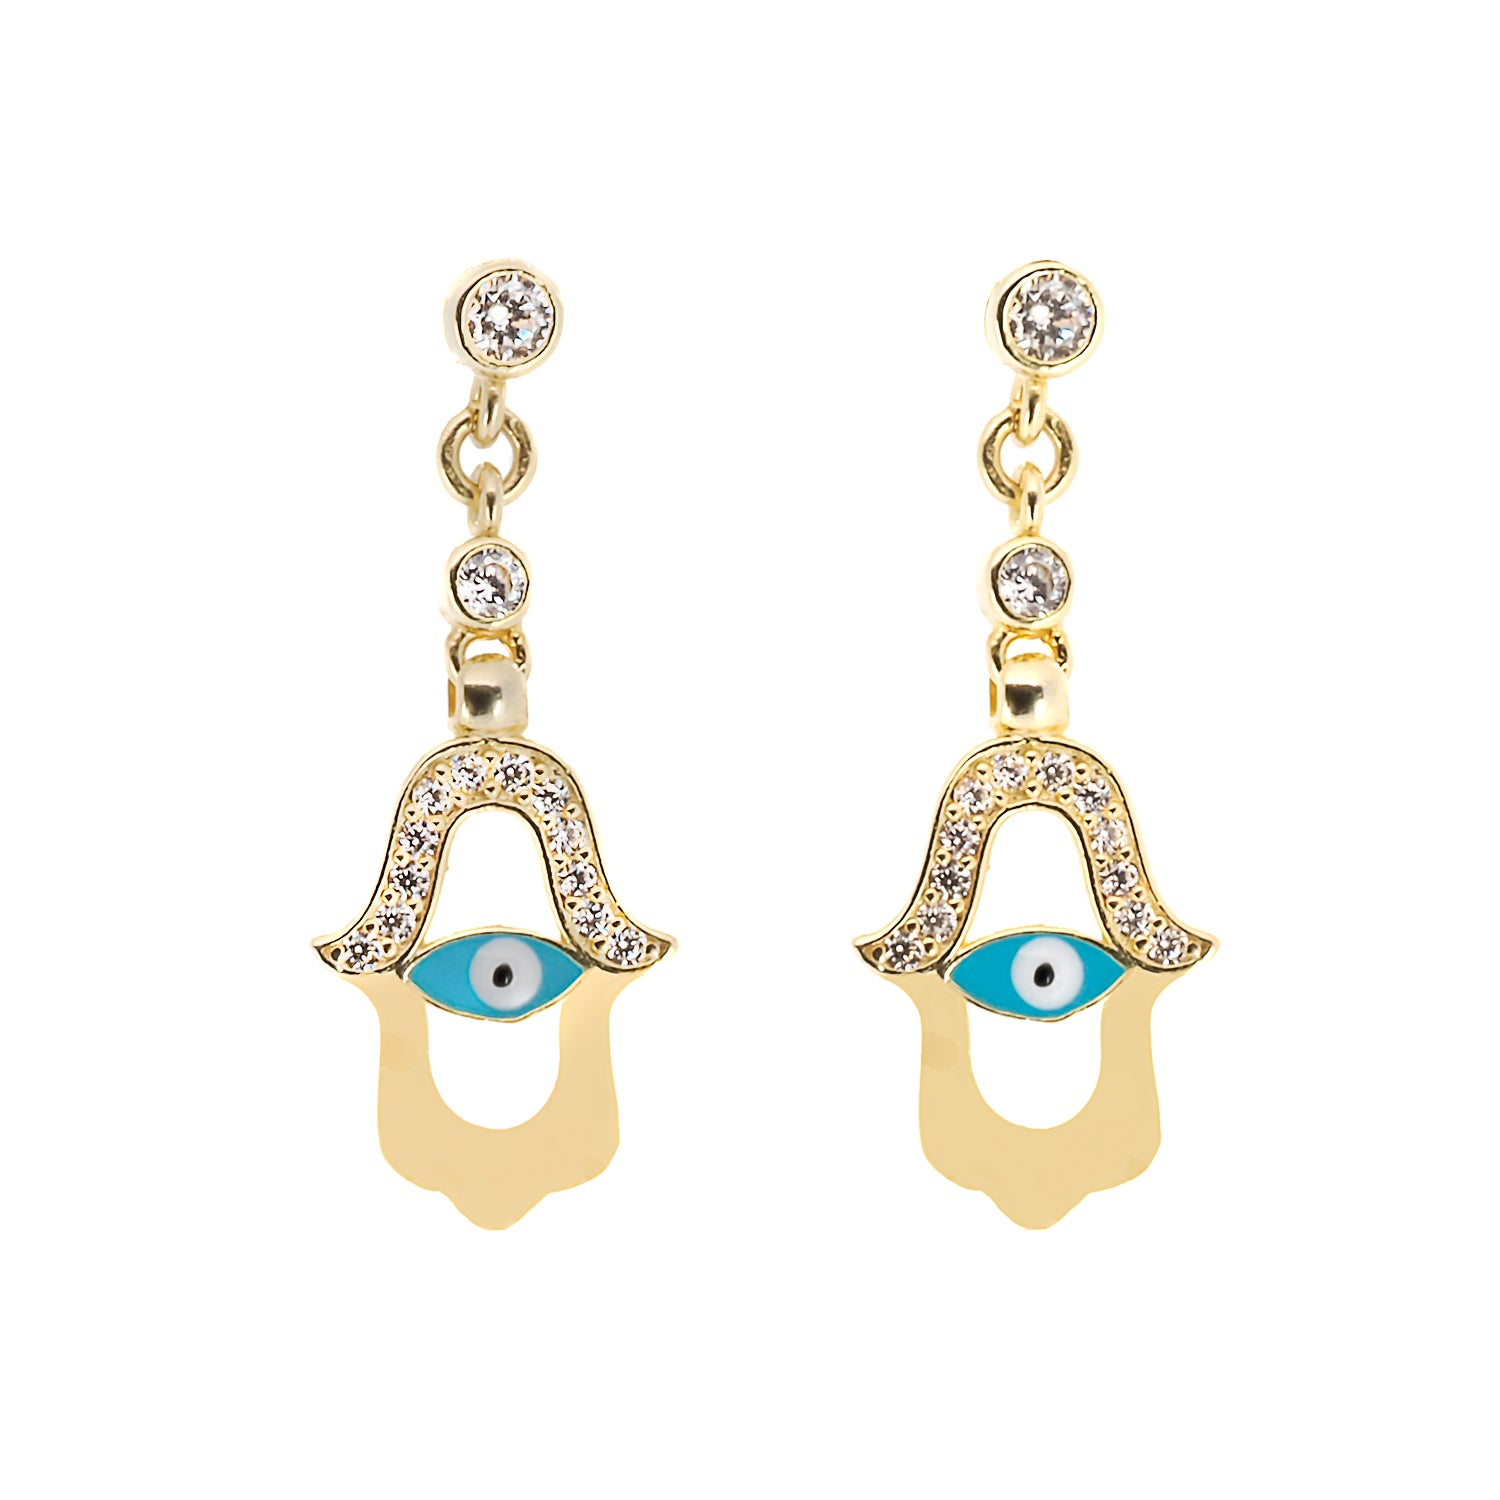 Turquoise Evil Eye Gold Hamsa Earrings with sterling silver and 18K gold plating, adorned with CZ diamonds